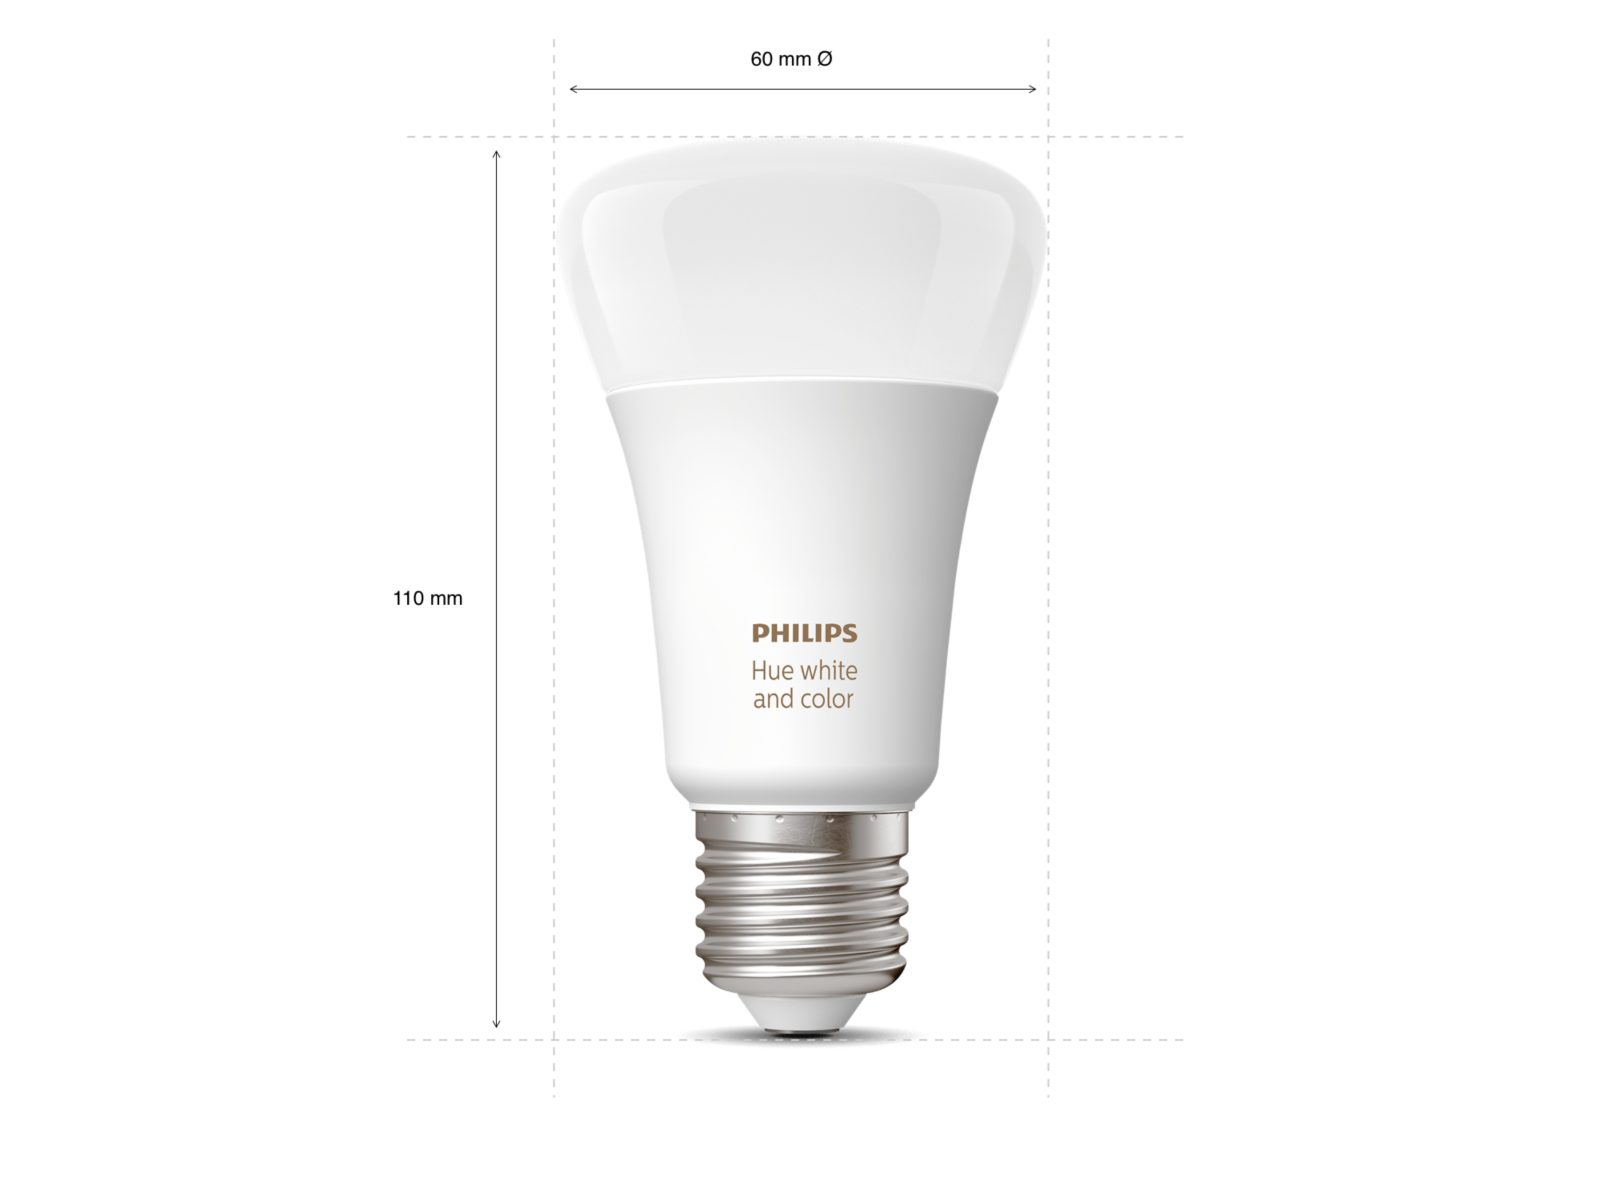 The philips hue E27 Smart Colour light bulb with dimensions shown for height and width 